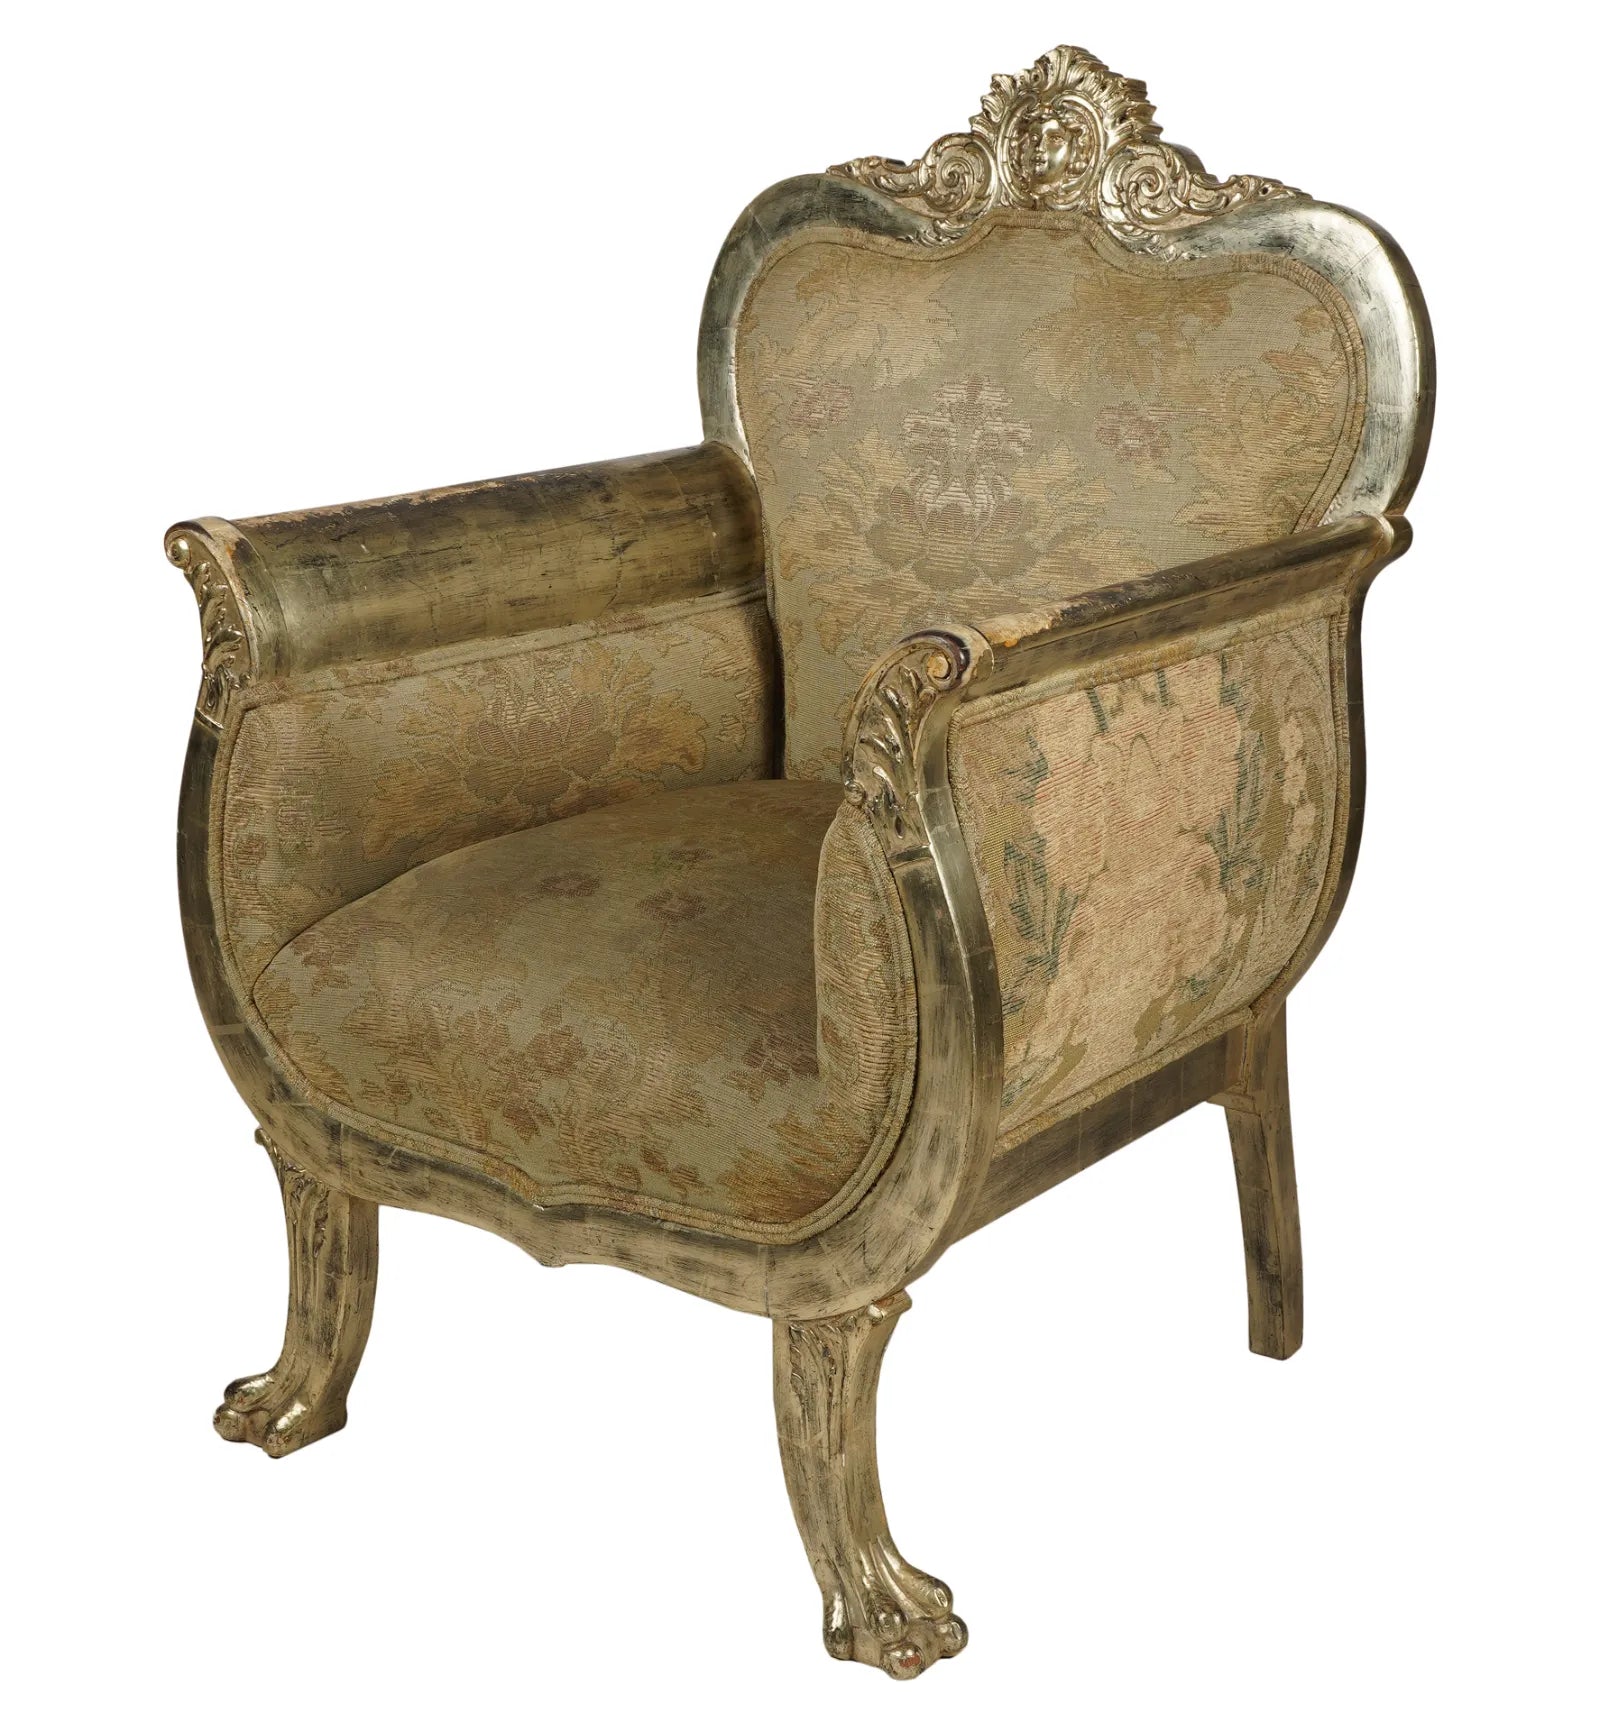 AF2-034: Antique Mid 19th Century French Rococo Revival Upholstered Silver Leaf Carved Arm Chair